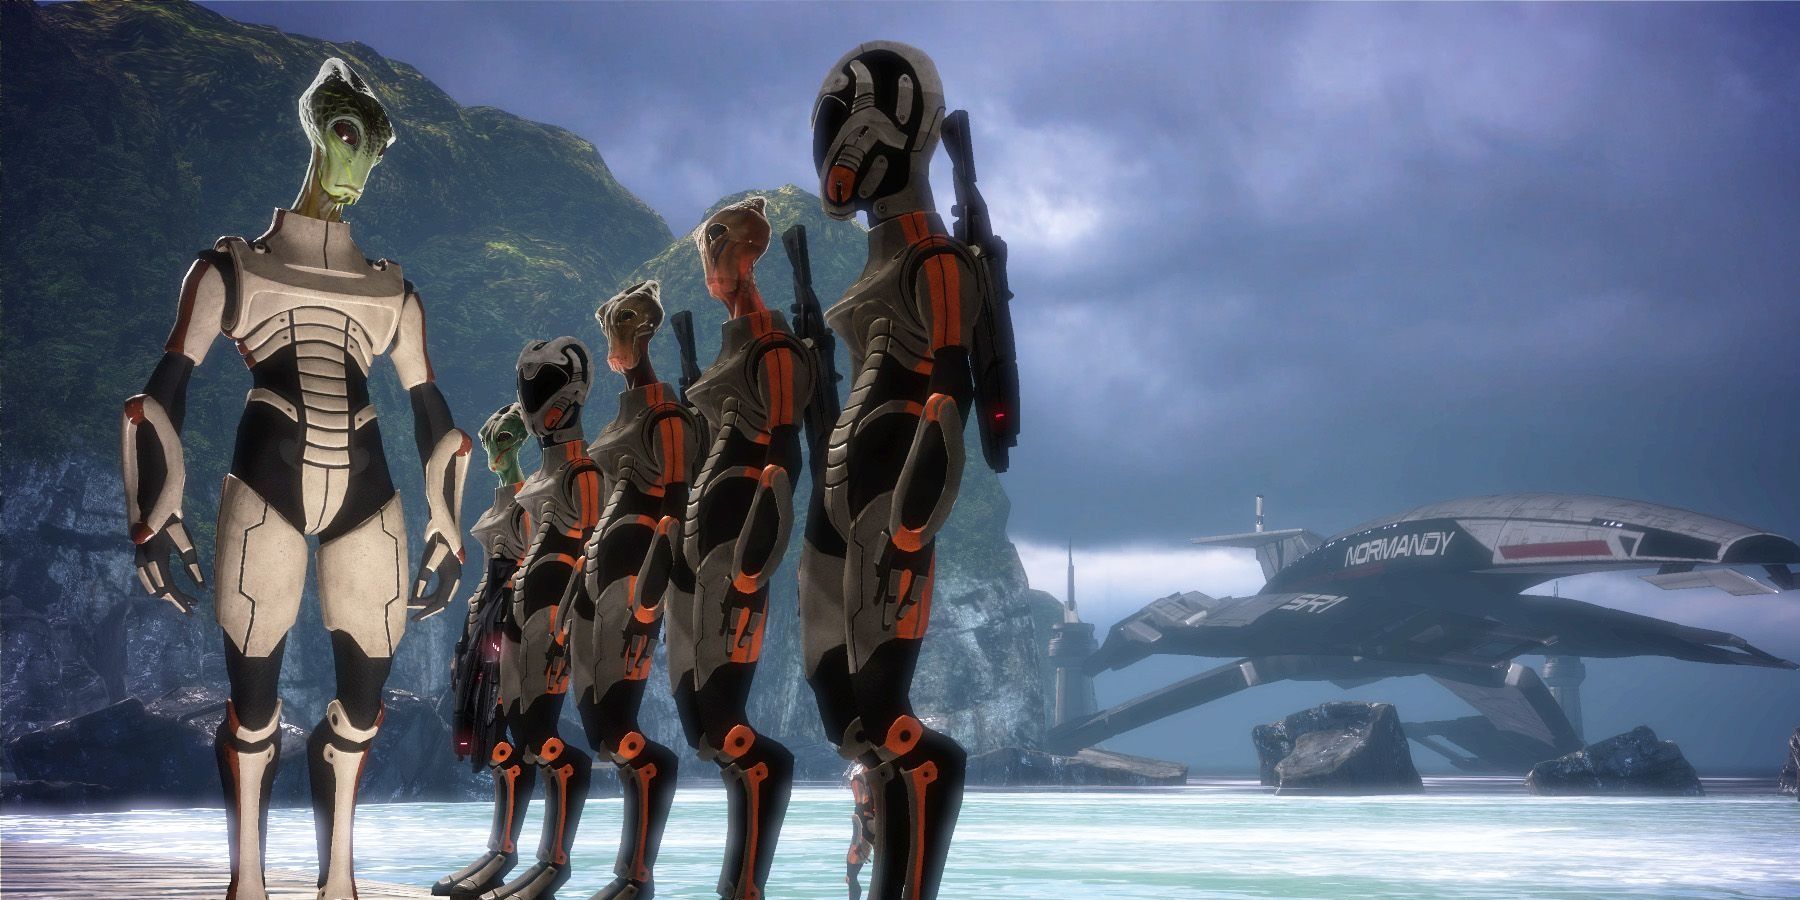 Saving Captain Kirrahe in Mass Effect 1: Legendary Edition can give players the best ending